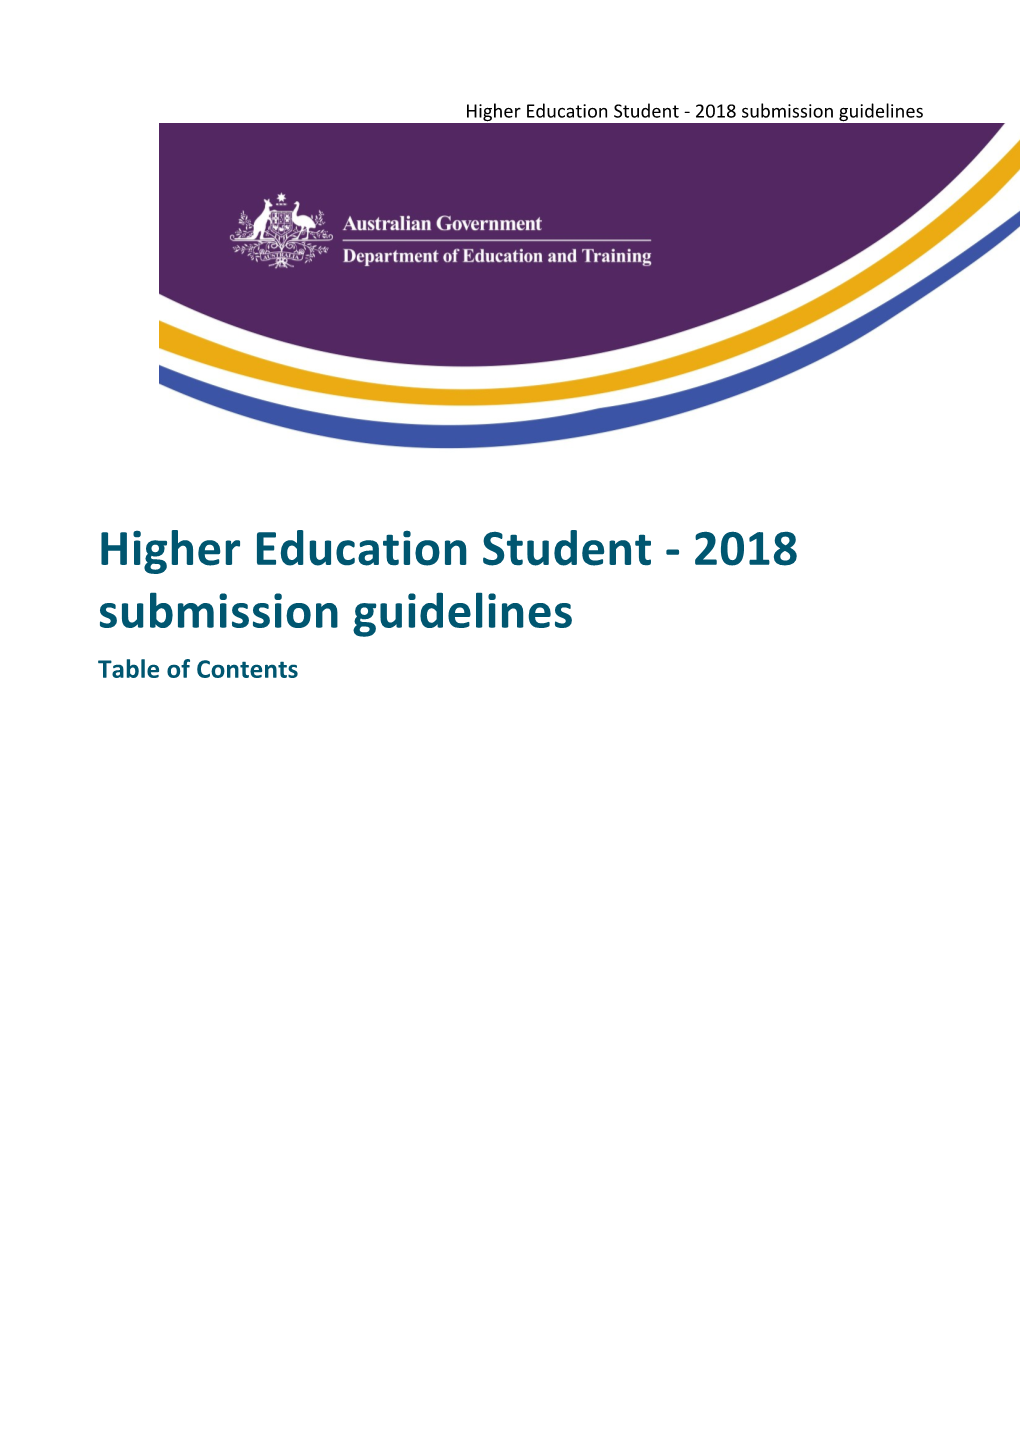 Higher Education Student - 2018 Submission Guidelines